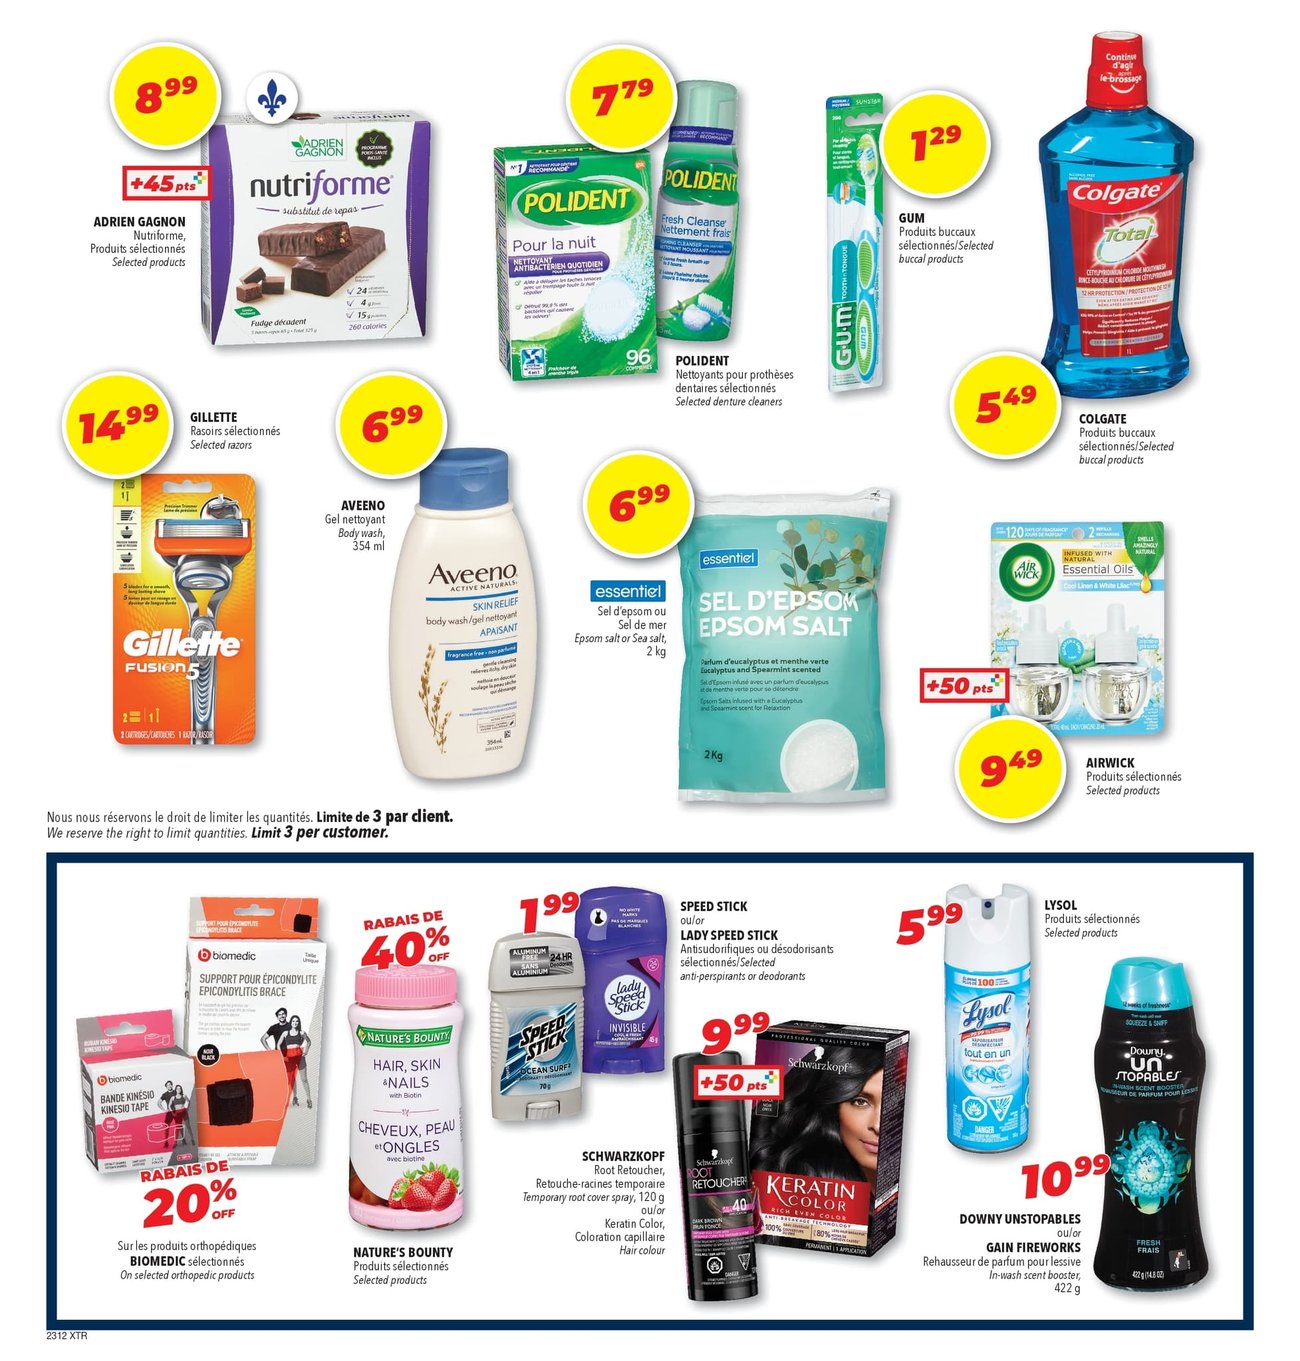 Familiprix - Weekly Flyer Specials - Page 15